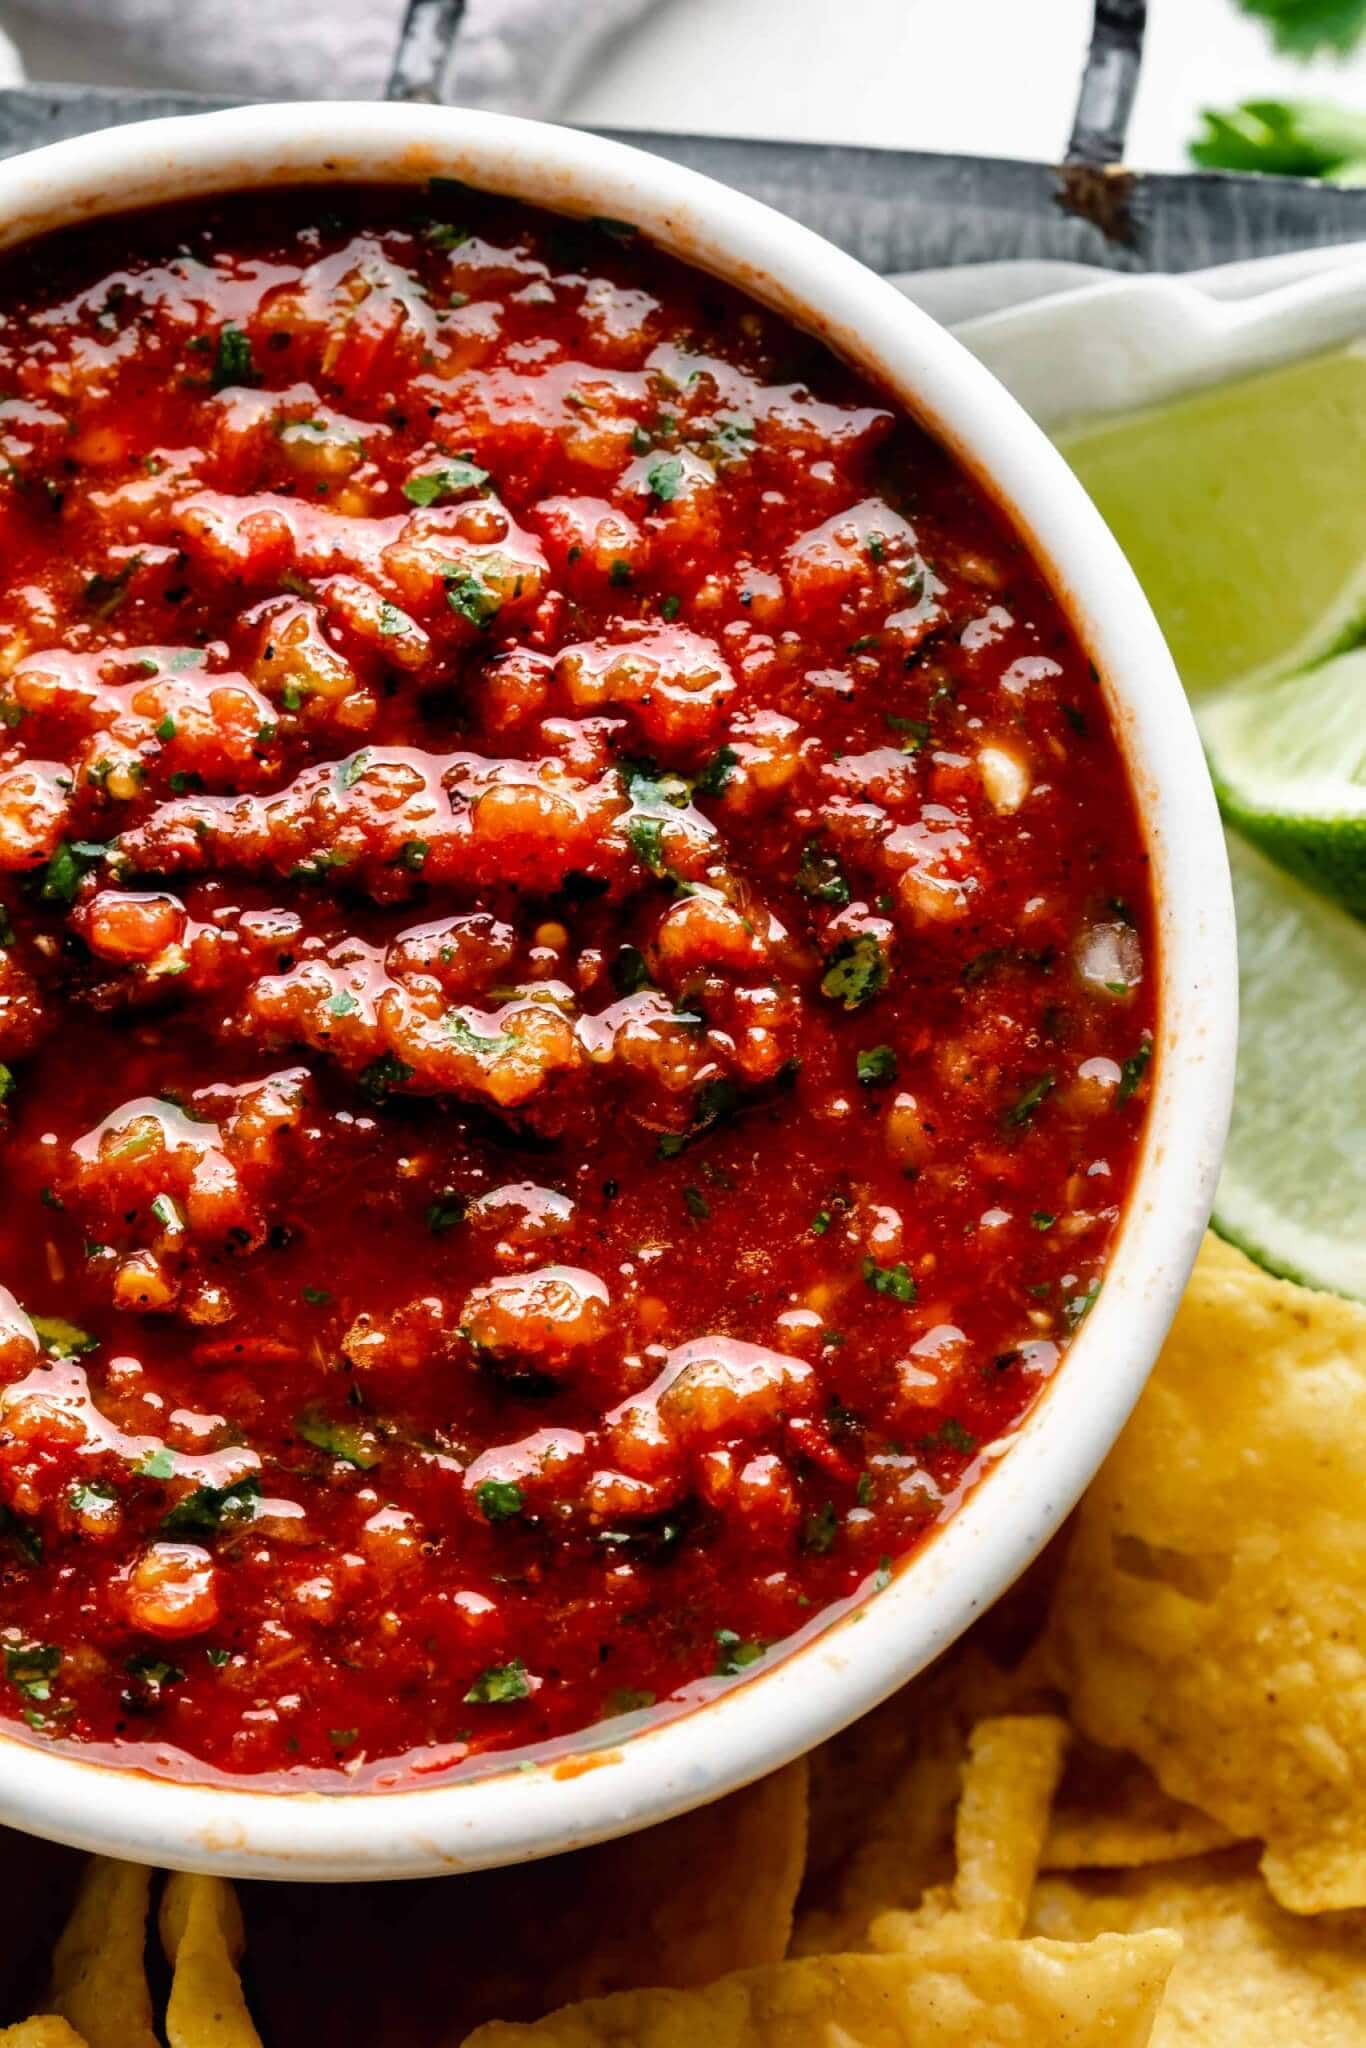 Bowl of chipotle salsa in serving tray with chips and limes.